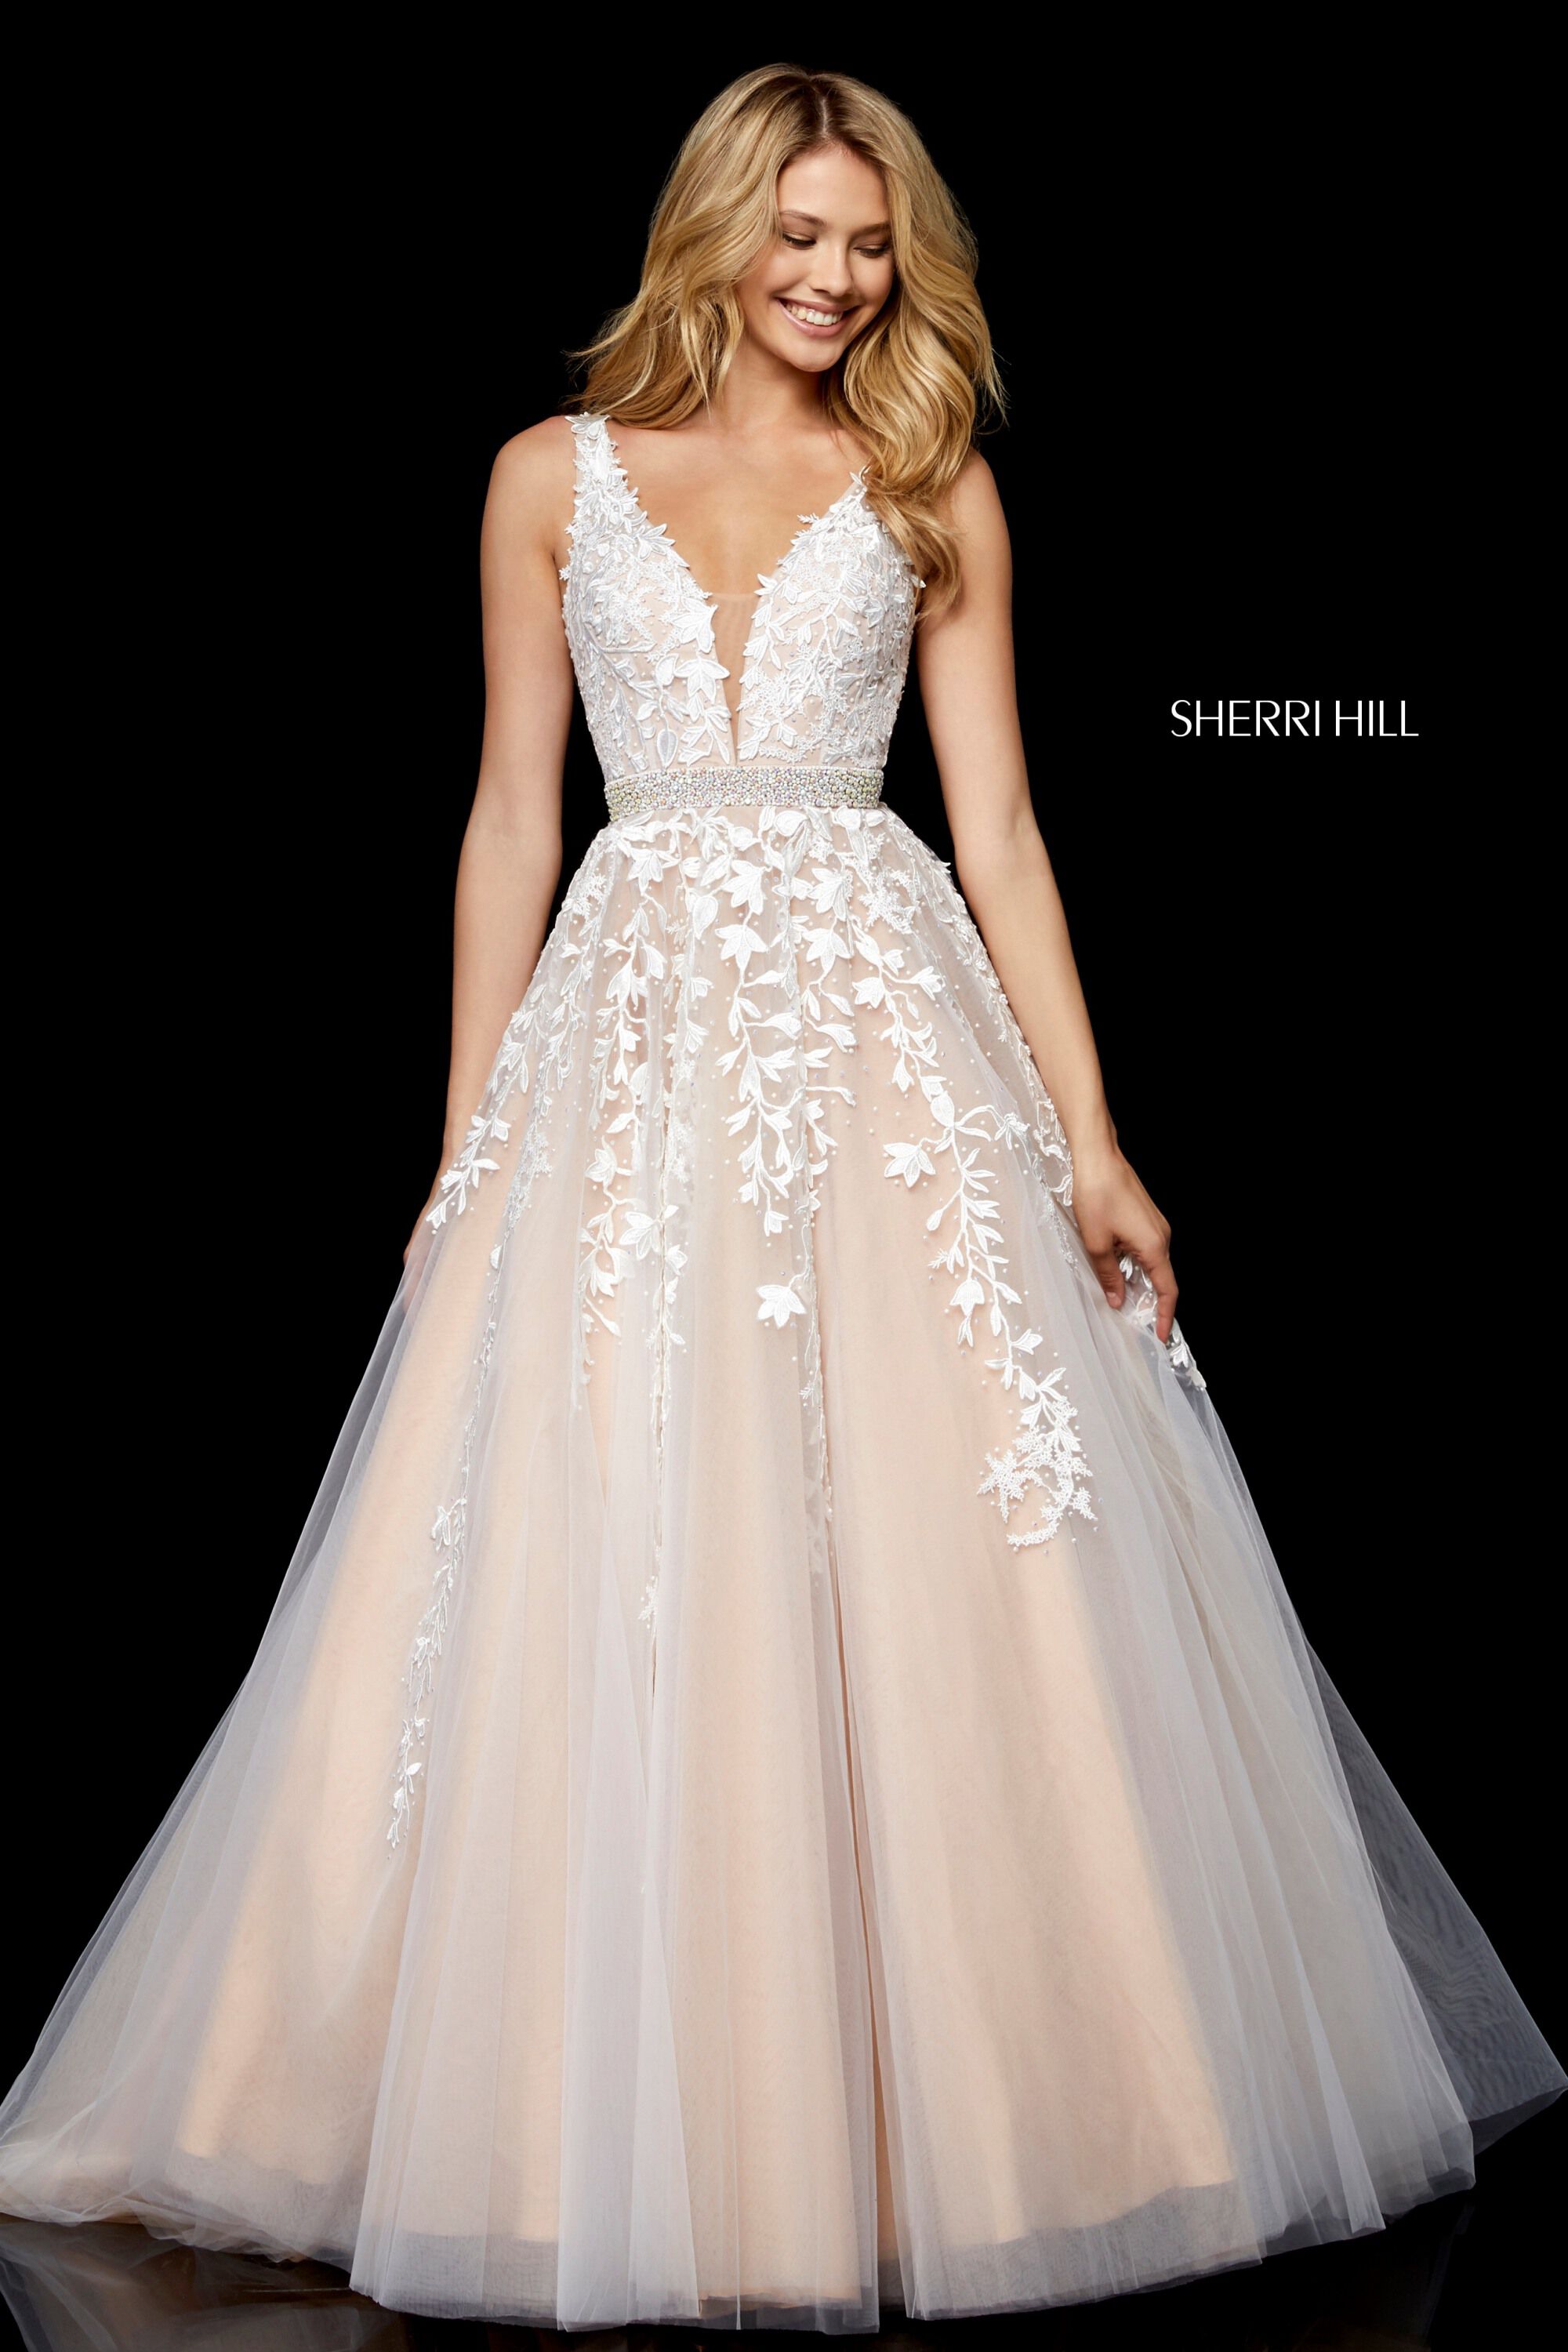 style № 11335 designed by SherriHill